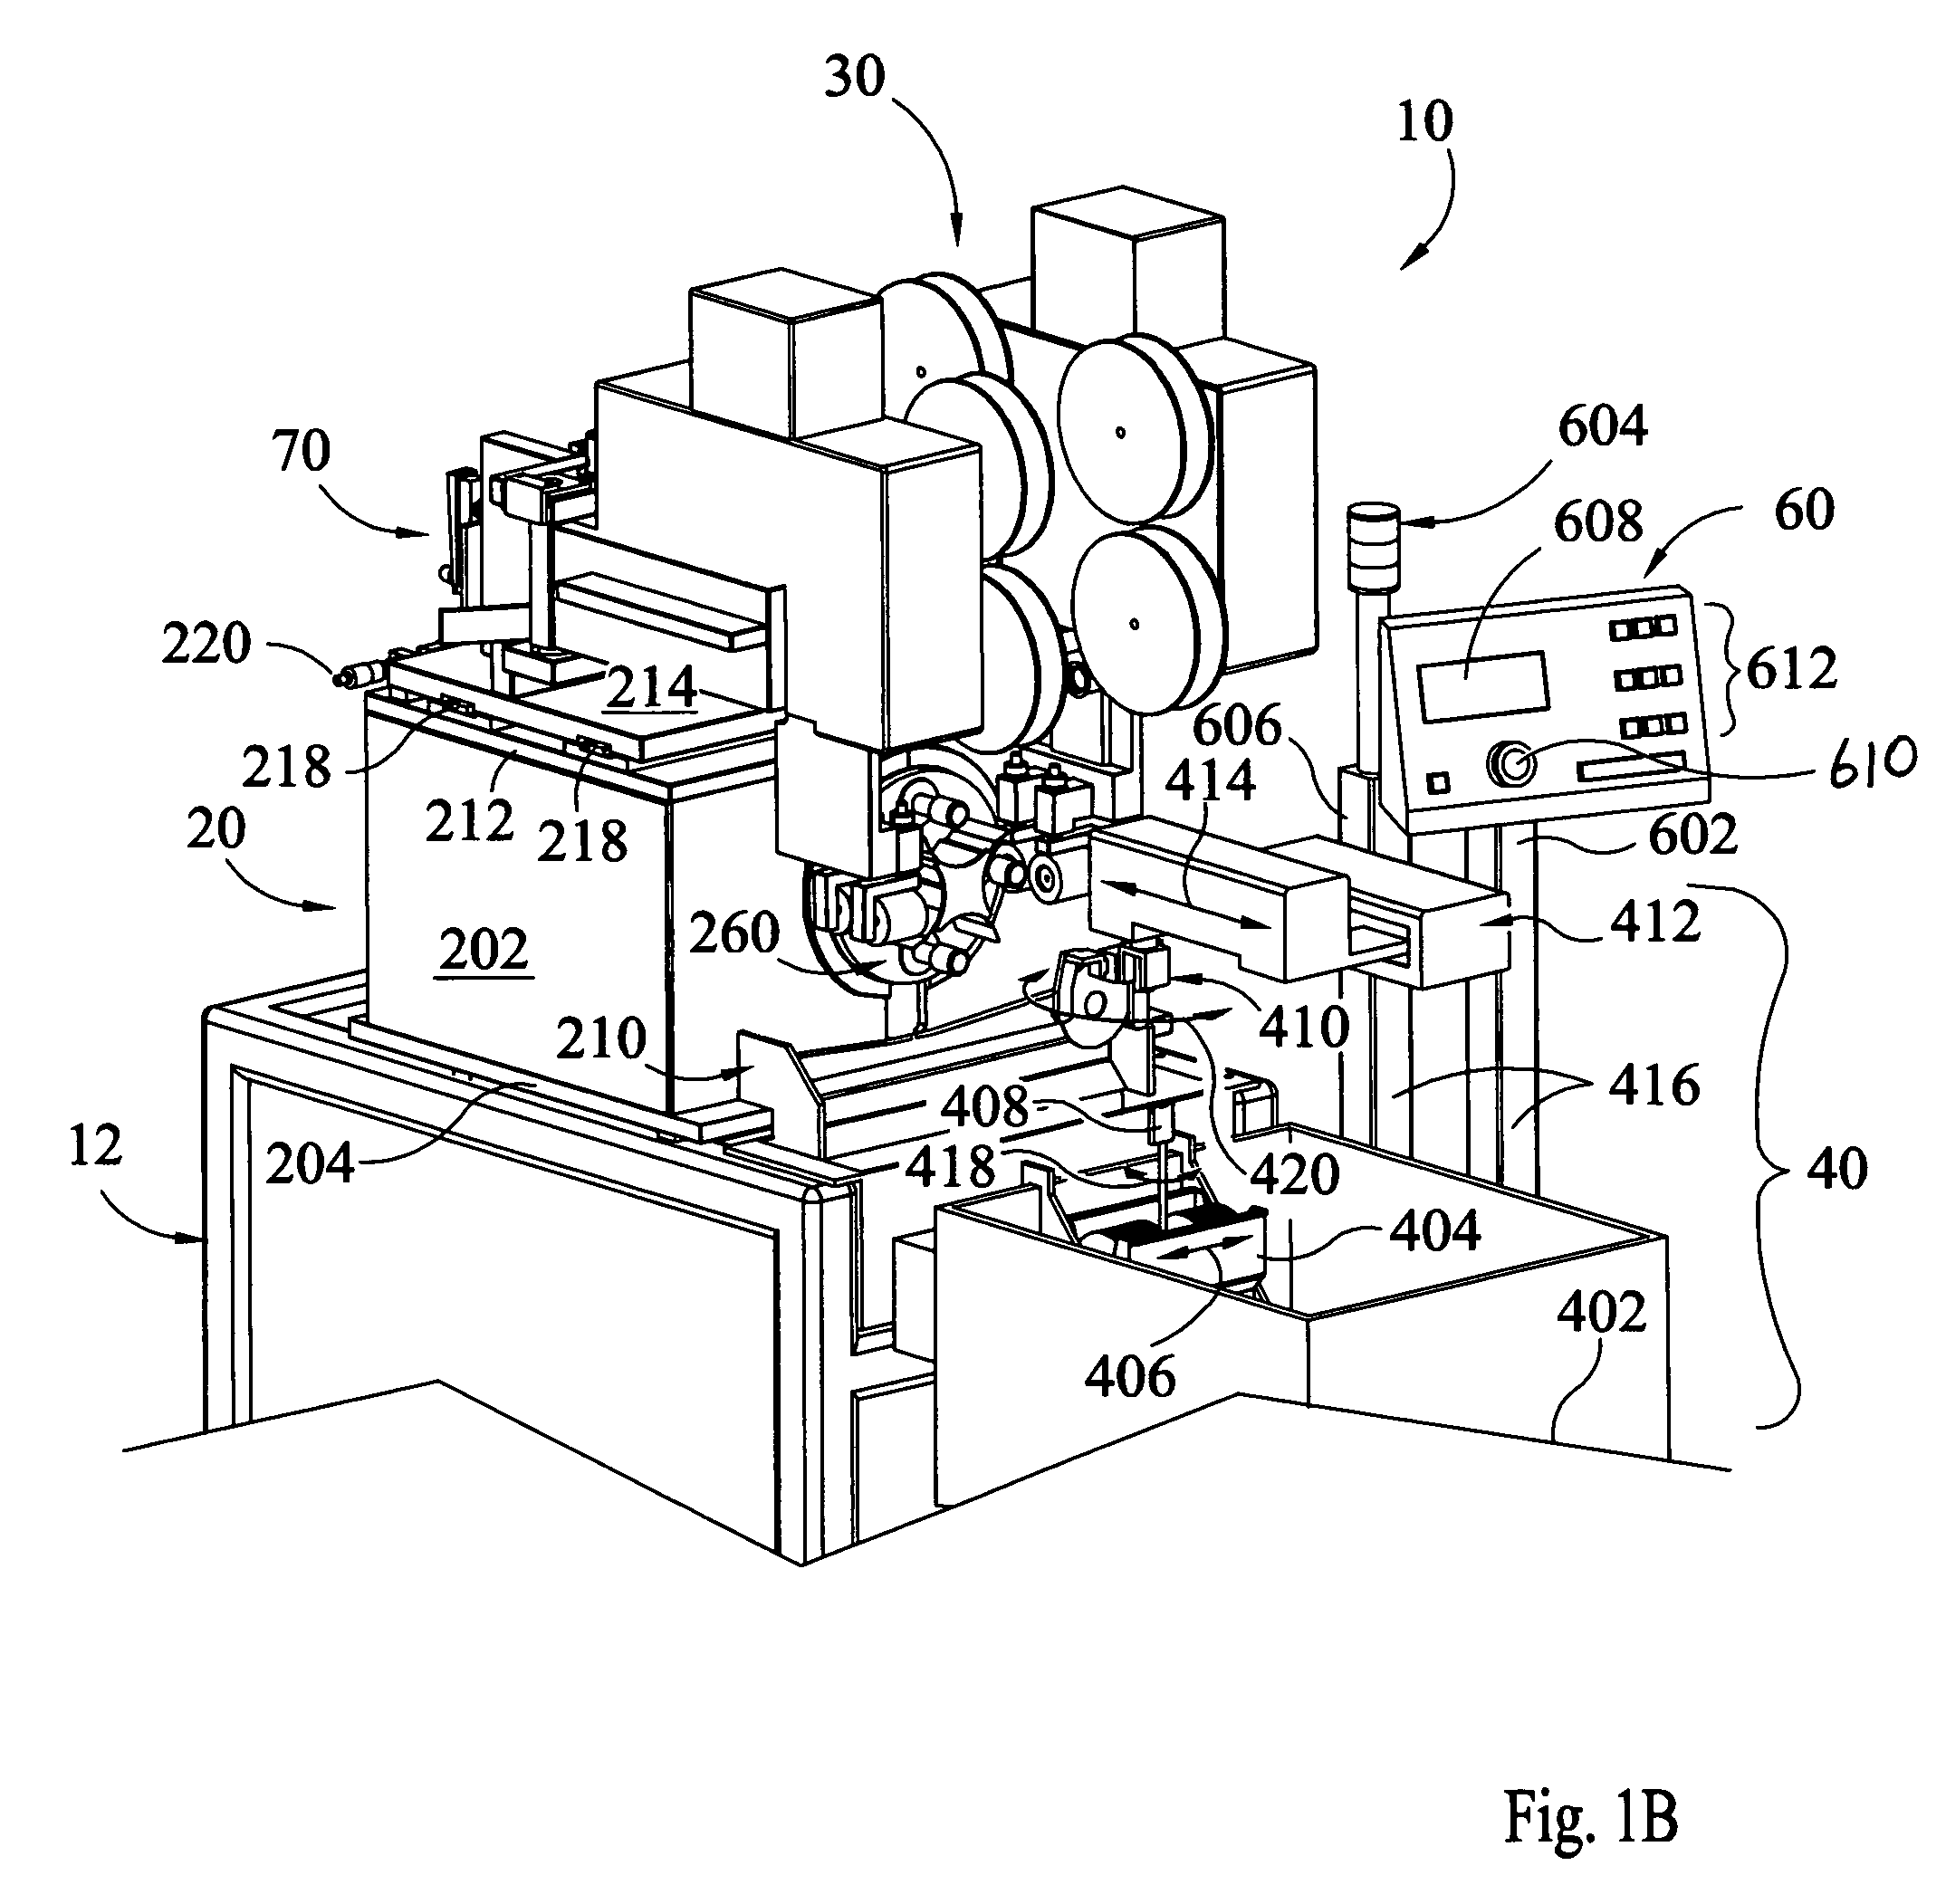 Multi-station disk finishing apparatus and method